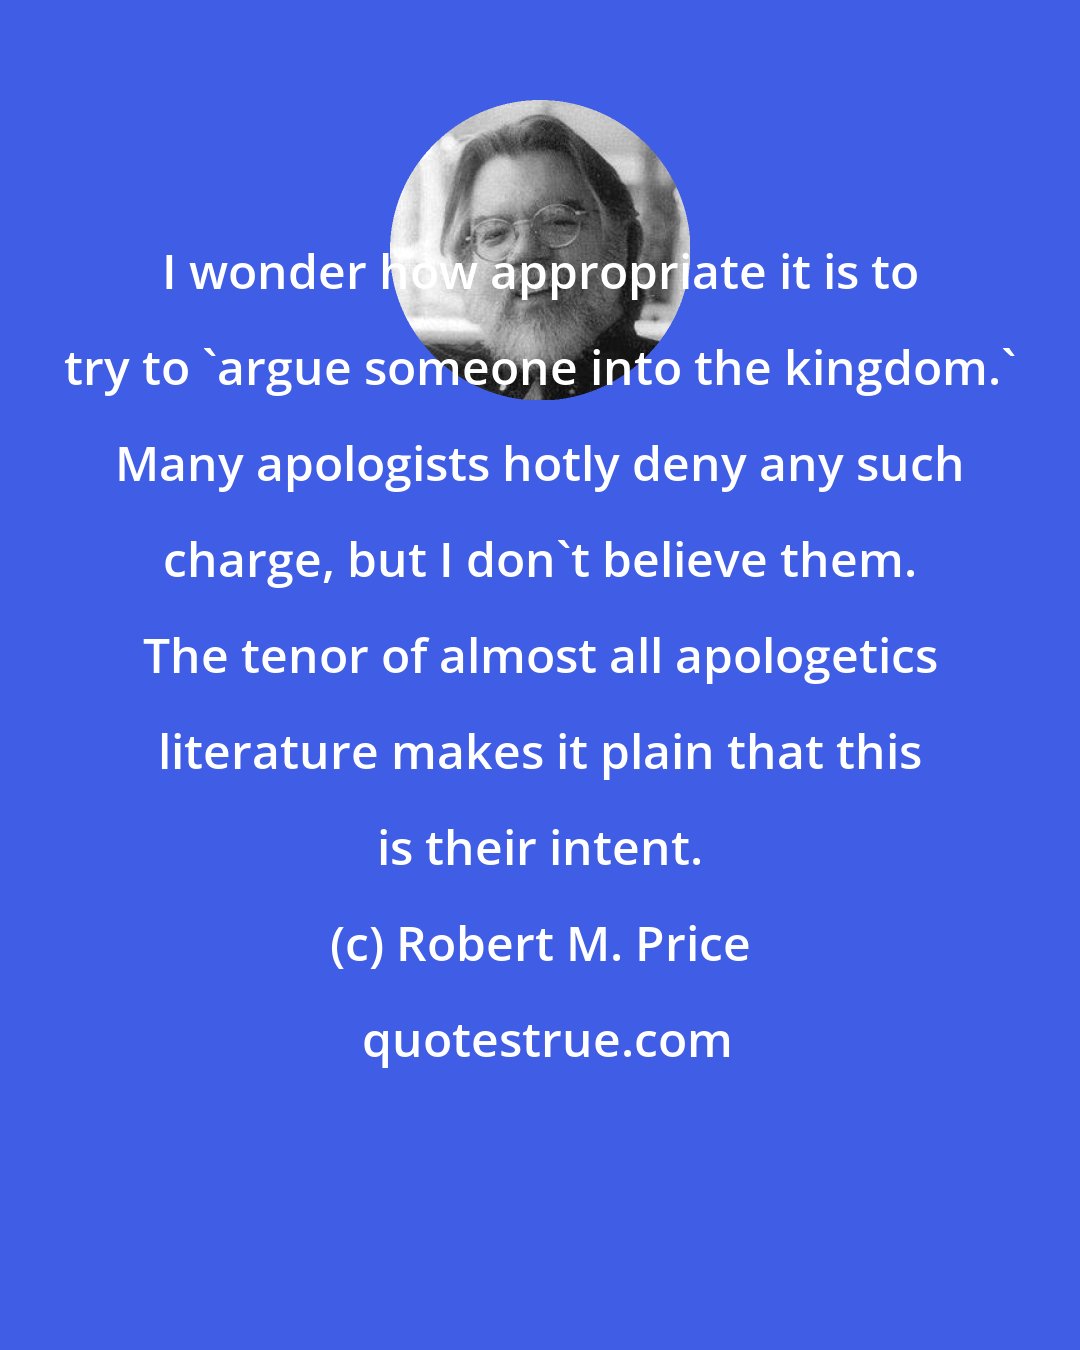 Robert M. Price: I wonder how appropriate it is to try to 'argue someone into the kingdom.' Many apologists hotly deny any such charge, but I don't believe them. The tenor of almost all apologetics literature makes it plain that this is their intent.